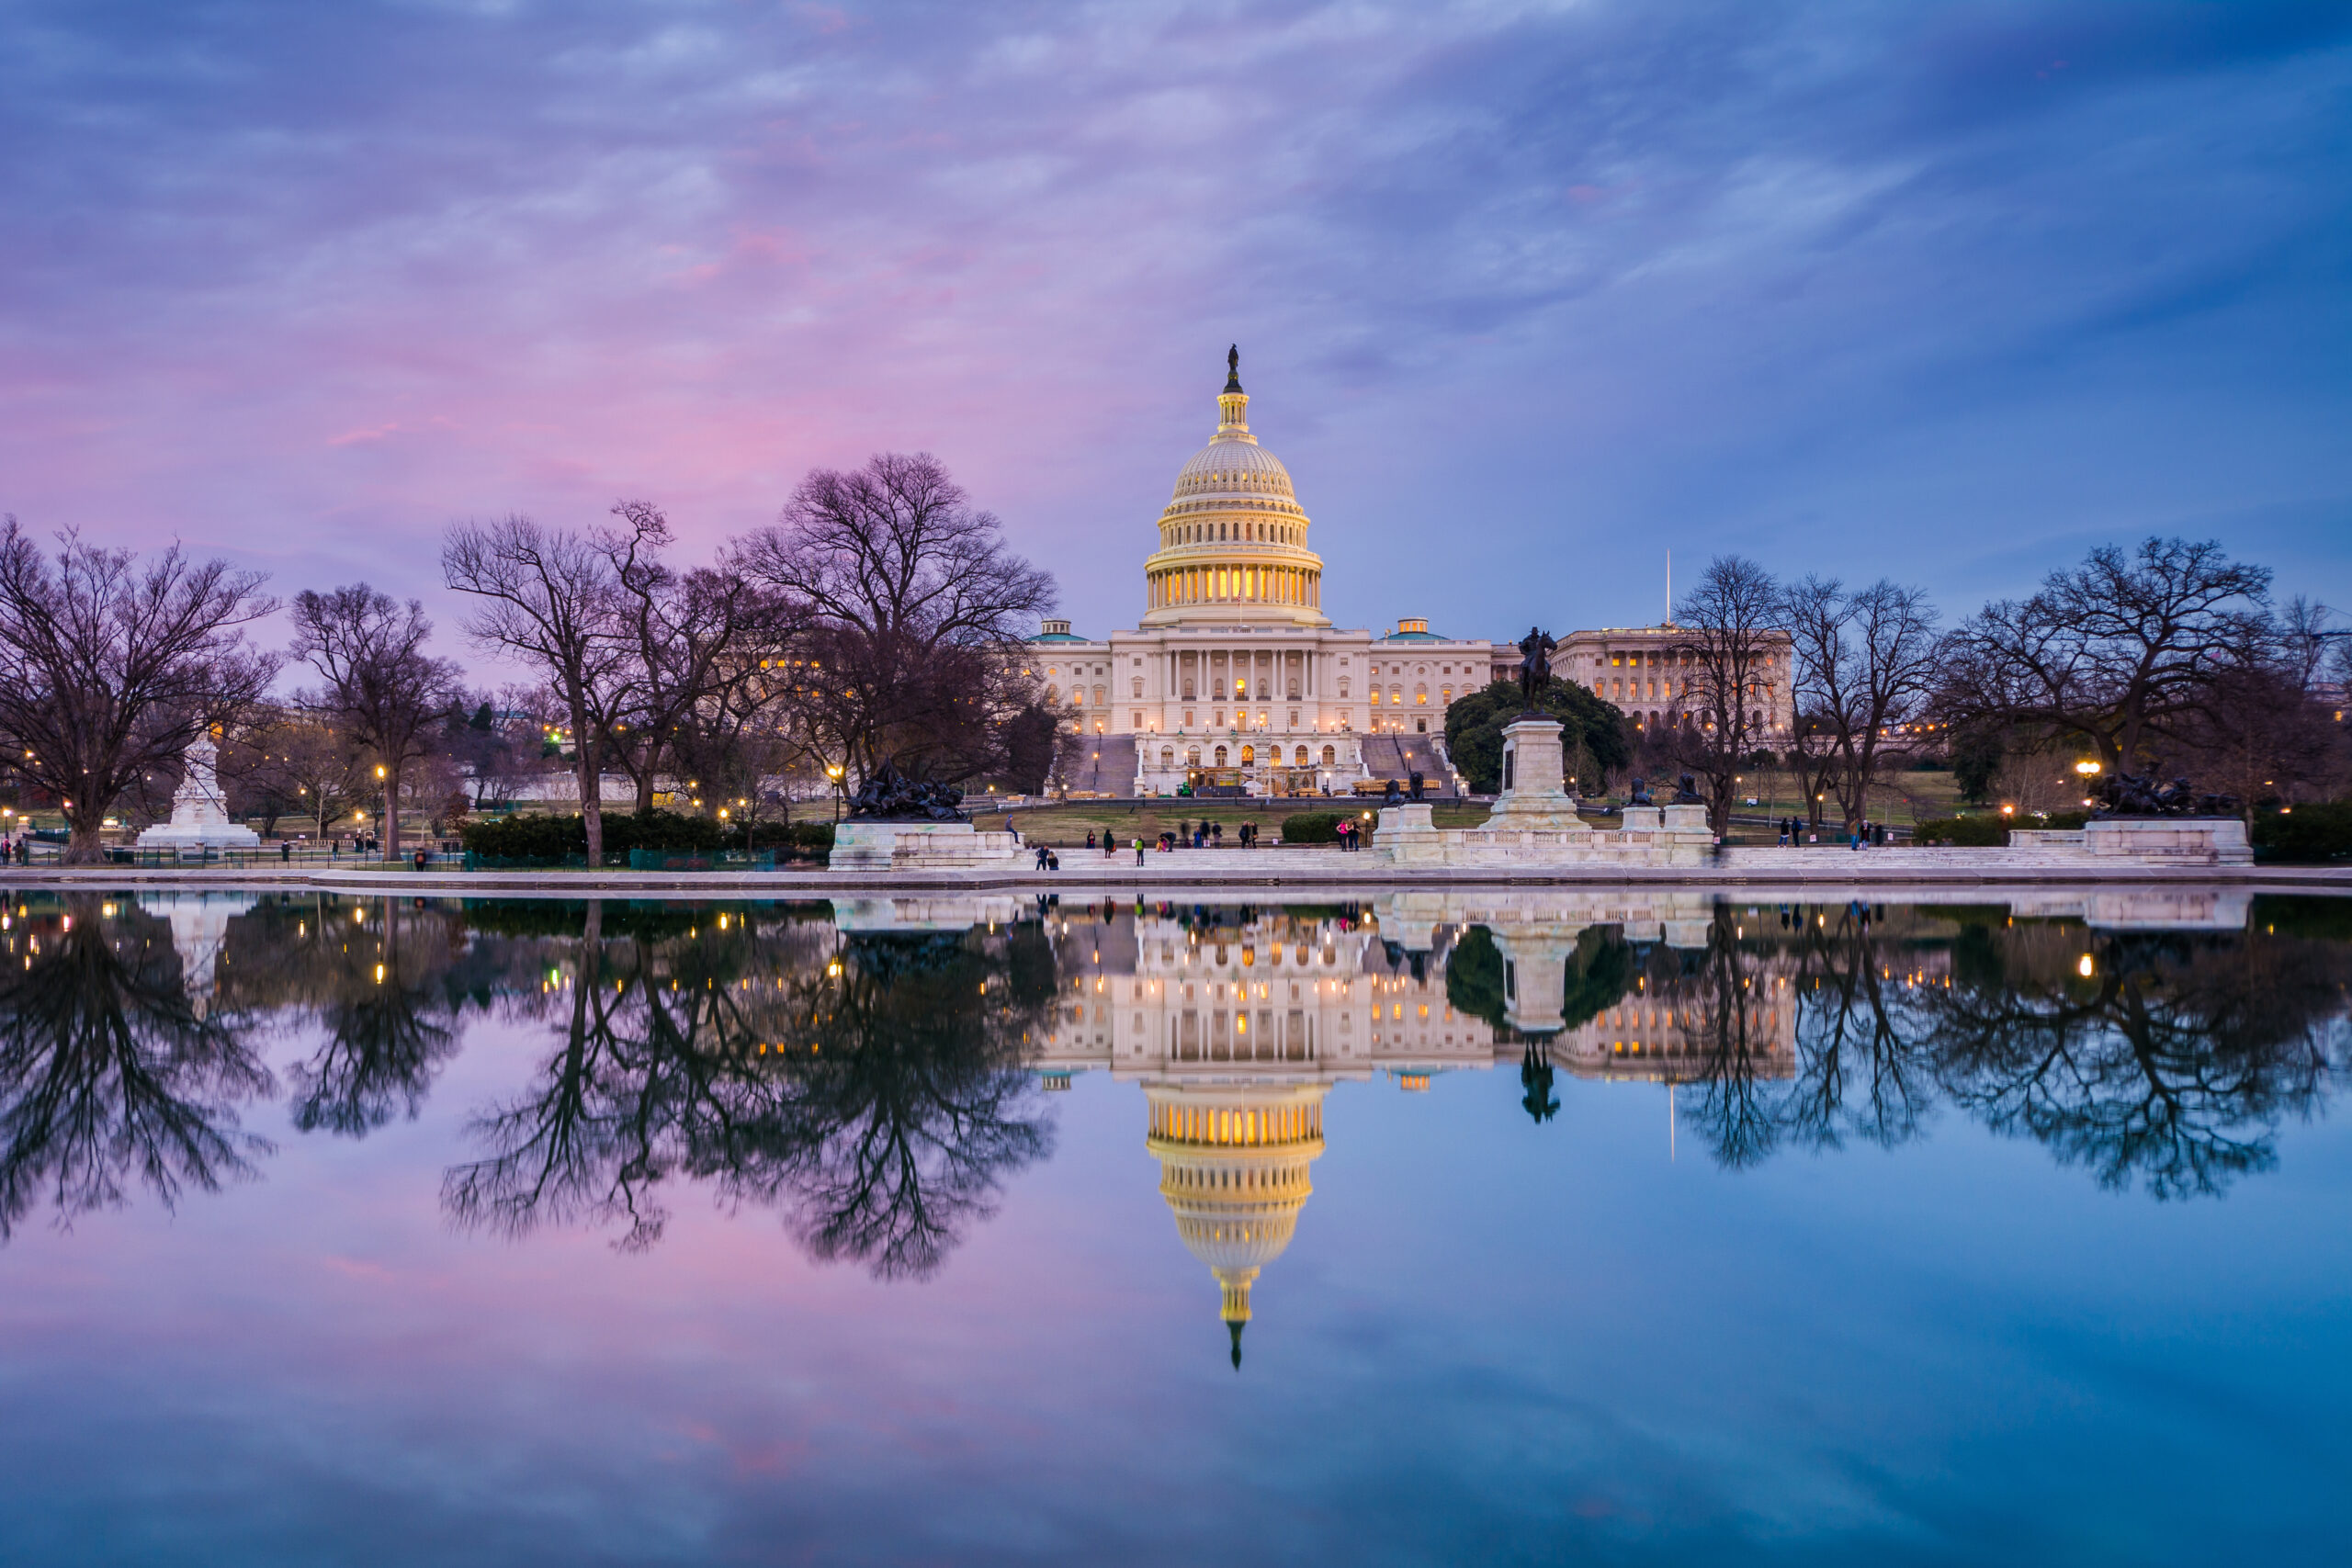 The United States Capitol at sunset, in Washington, DC